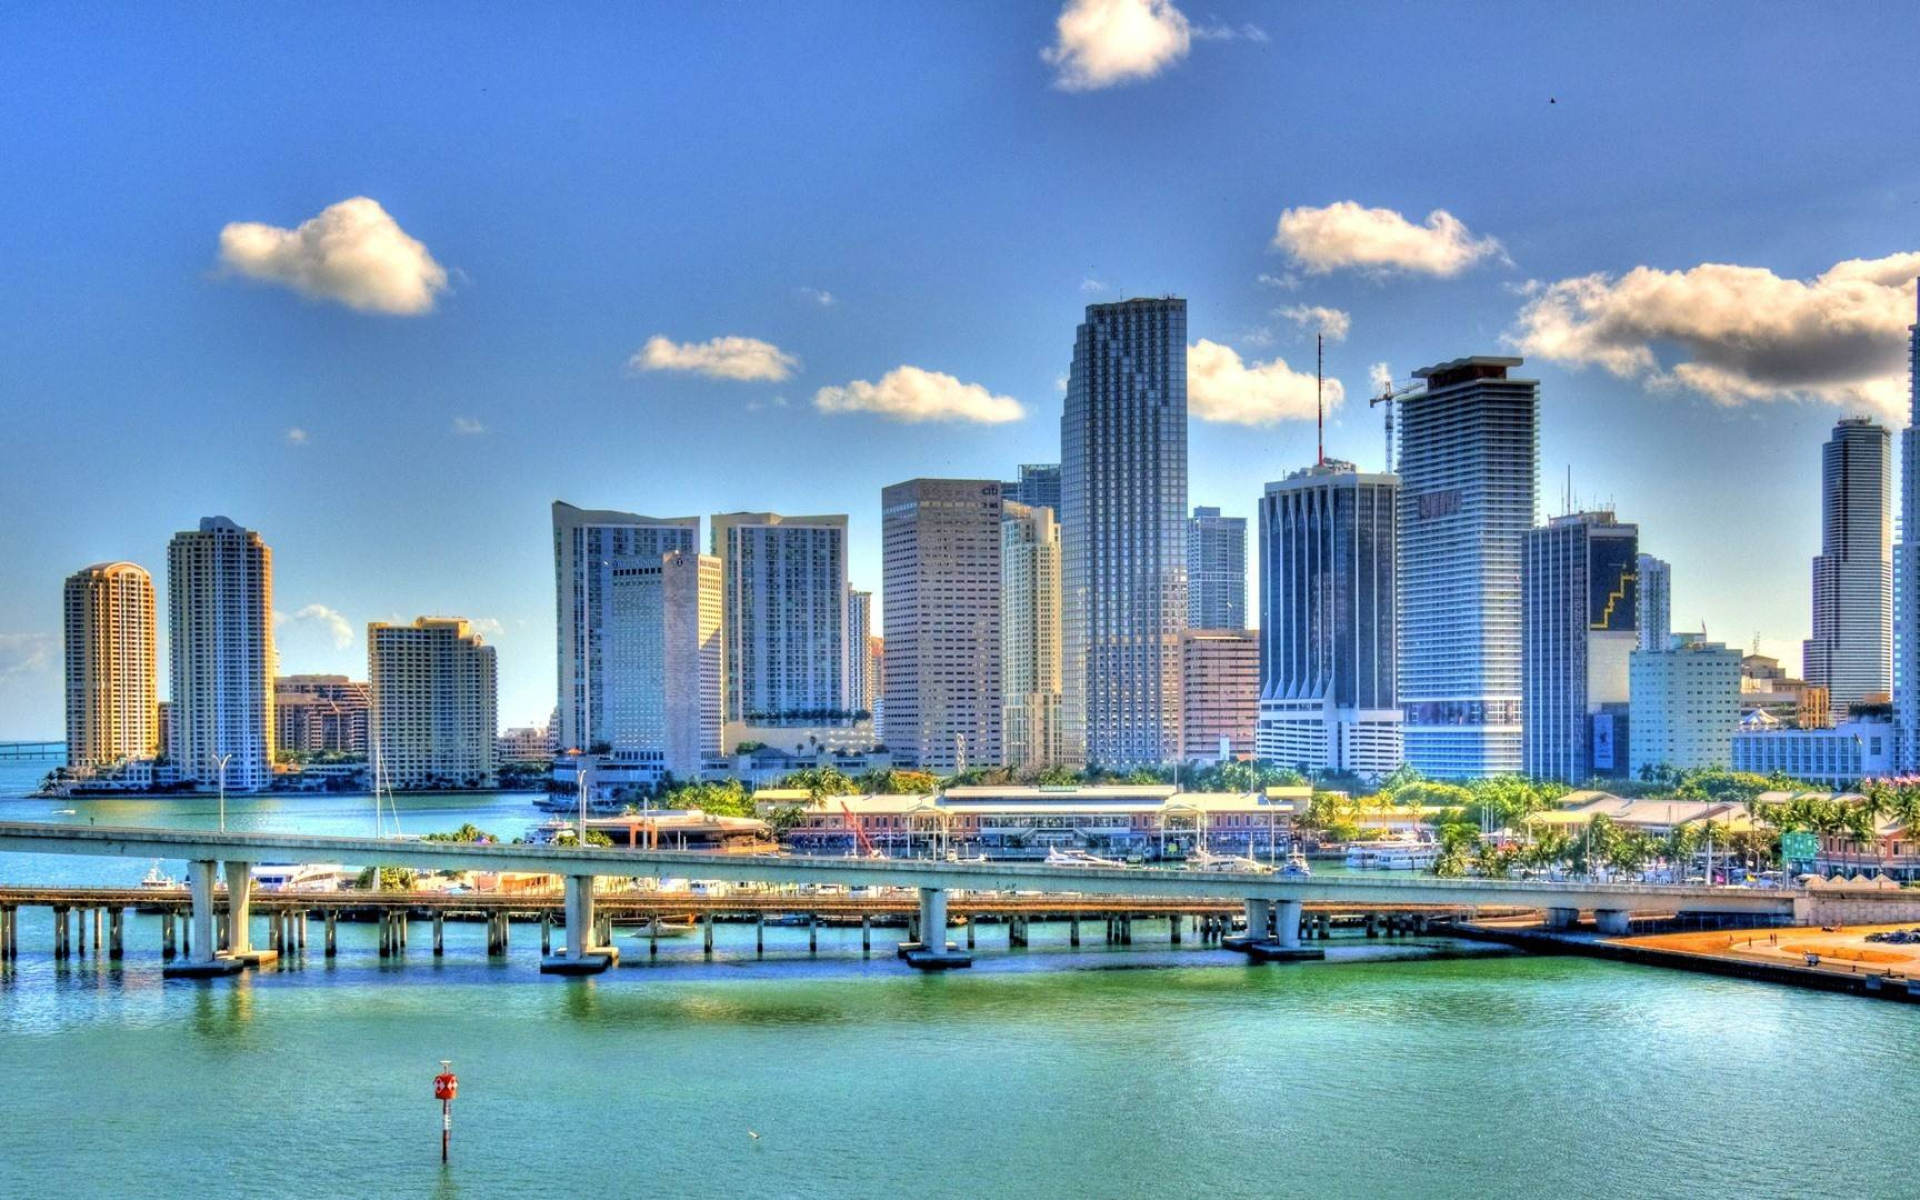 Download wallpaper Miami, HDR, summer, cityscapes, american